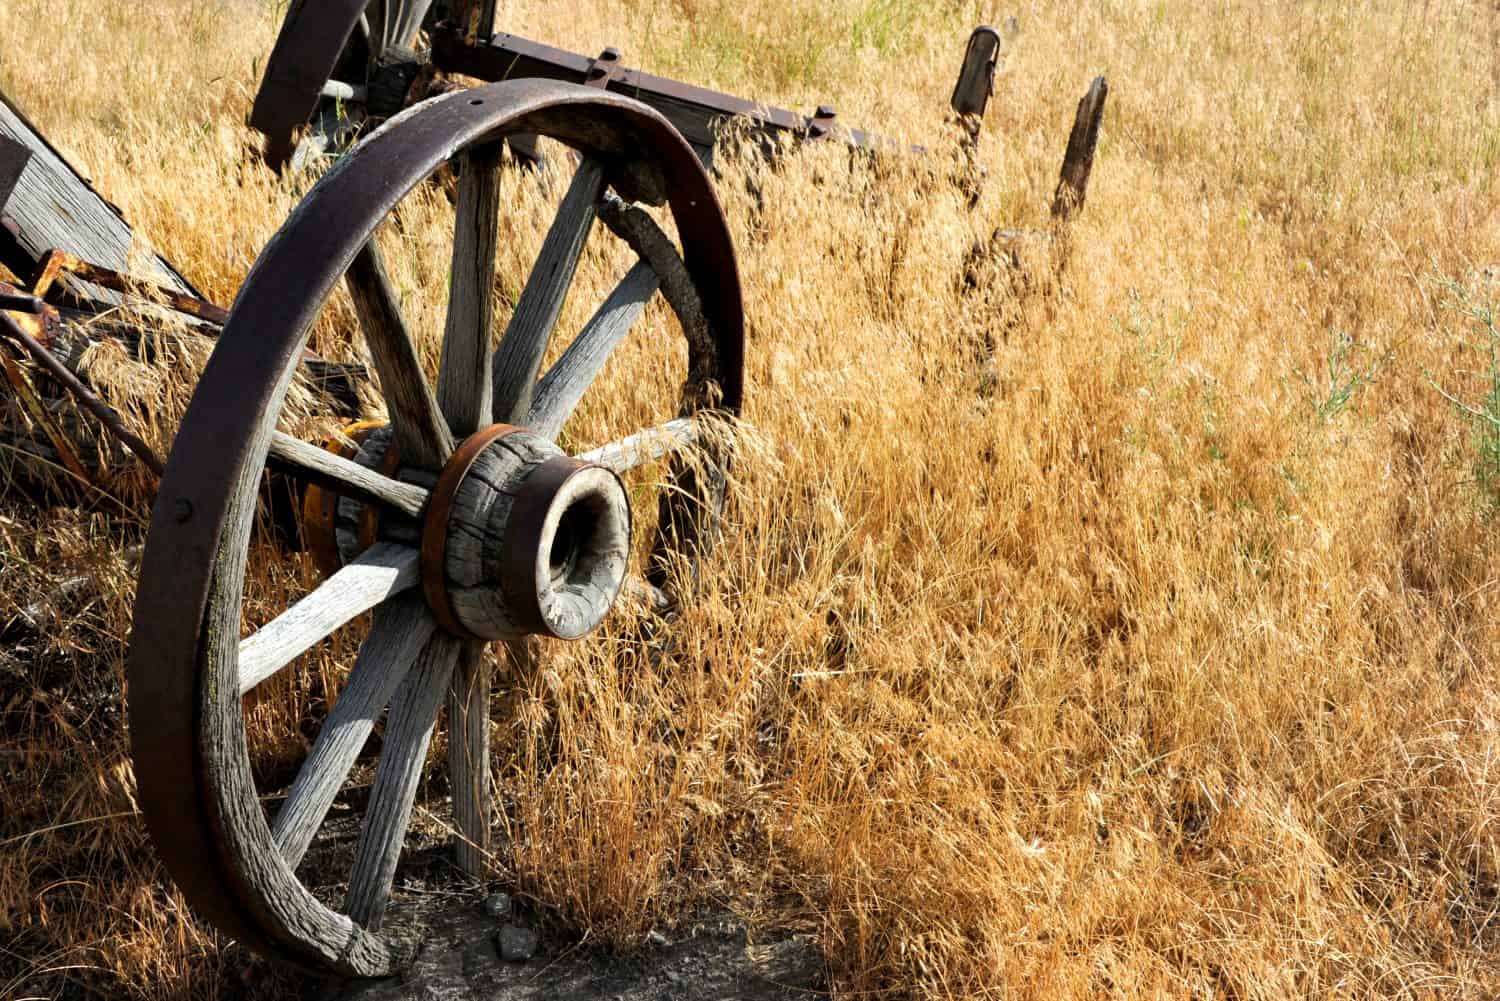 Wagon wheel axles lay rotting in a field. Wheels have metal staves and wooden hubs and spokes. Wagon lays in a field in Wyoming.